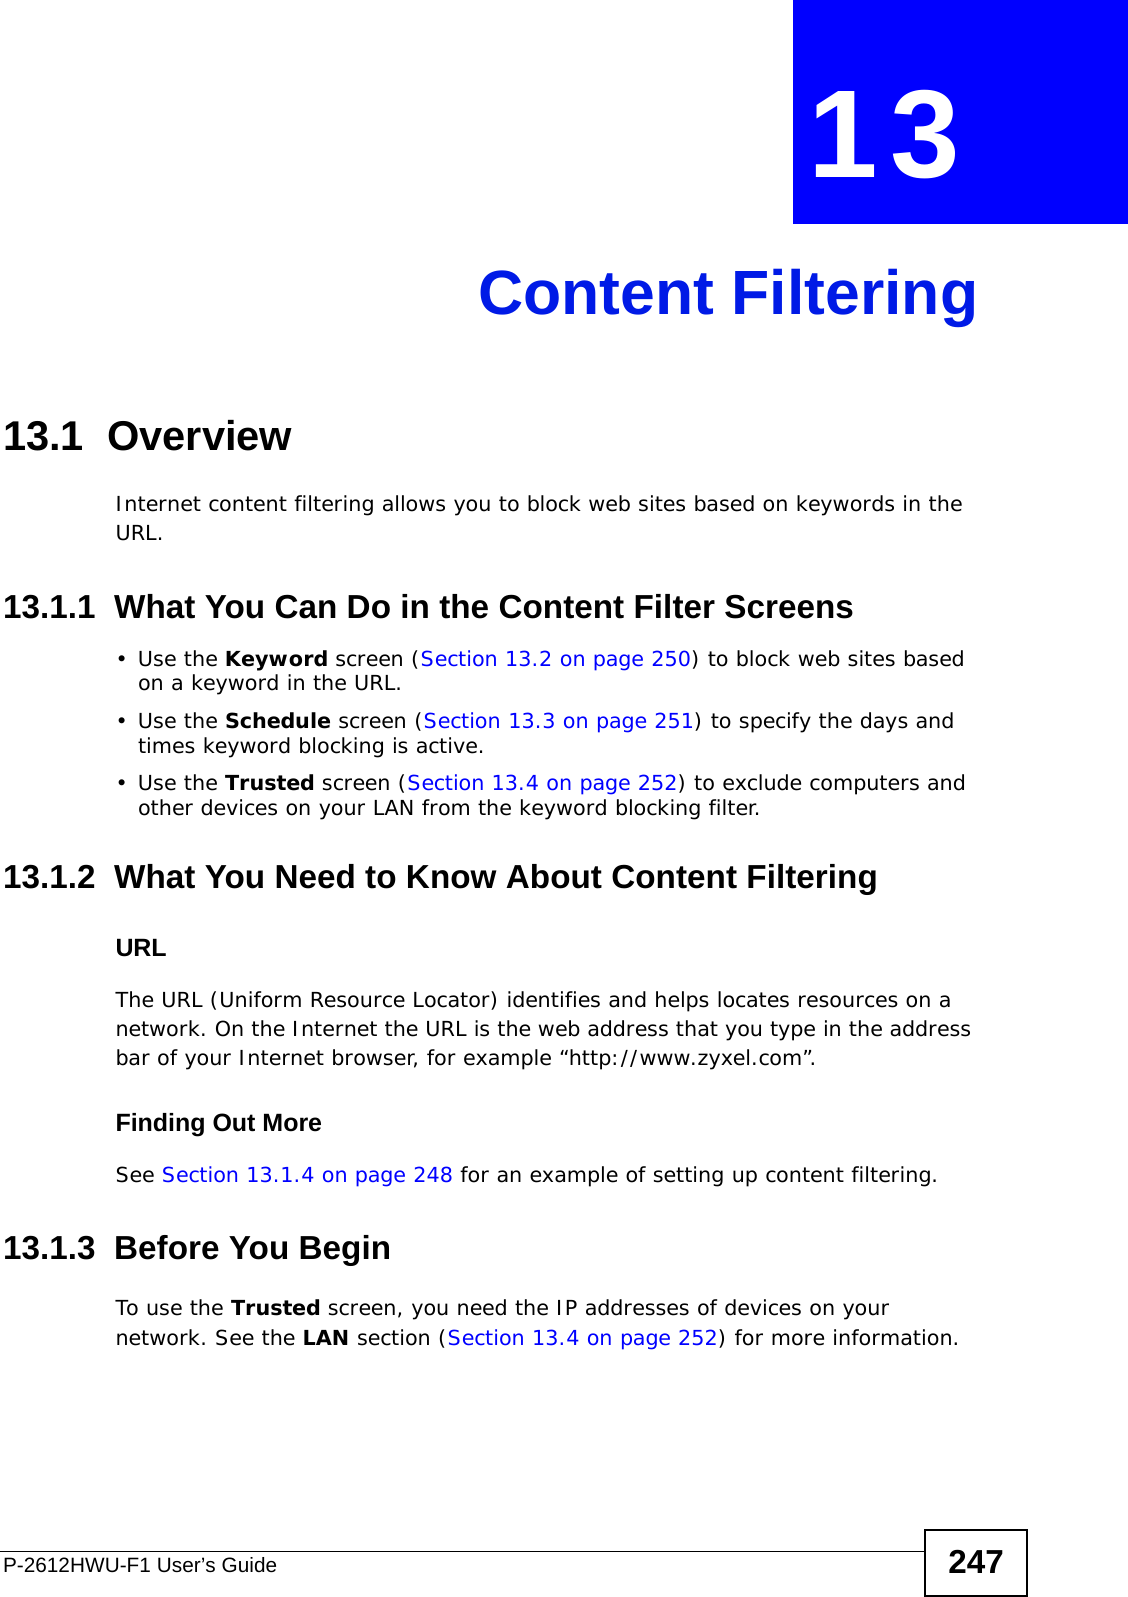 P-2612HWU-F1 User’s Guide 247CHAPTER  13 Content Filtering13.1  Overview Internet content filtering allows you to block web sites based on keywords in the URL.13.1.1  What You Can Do in the Content Filter Screens•Use the Keyword screen (Section 13.2 on page 250) to block web sites based on a keyword in the URL.•Use the Schedule screen (Section 13.3 on page 251) to specify the days and times keyword blocking is active.•Use the Trusted screen (Section 13.4 on page 252) to exclude computers and other devices on your LAN from the keyword blocking filter.13.1.2  What You Need to Know About Content FilteringURLThe URL (Uniform Resource Locator) identifies and helps locates resources on a network. On the Internet the URL is the web address that you type in the address bar of your Internet browser, for example “http://www.zyxel.com”.Finding Out MoreSee Section 13.1.4 on page 248 for an example of setting up content filtering.13.1.3  Before You BeginTo use the Trusted screen, you need the IP addresses of devices on your network. See the LAN section (Section 13.4 on page 252) for more information.